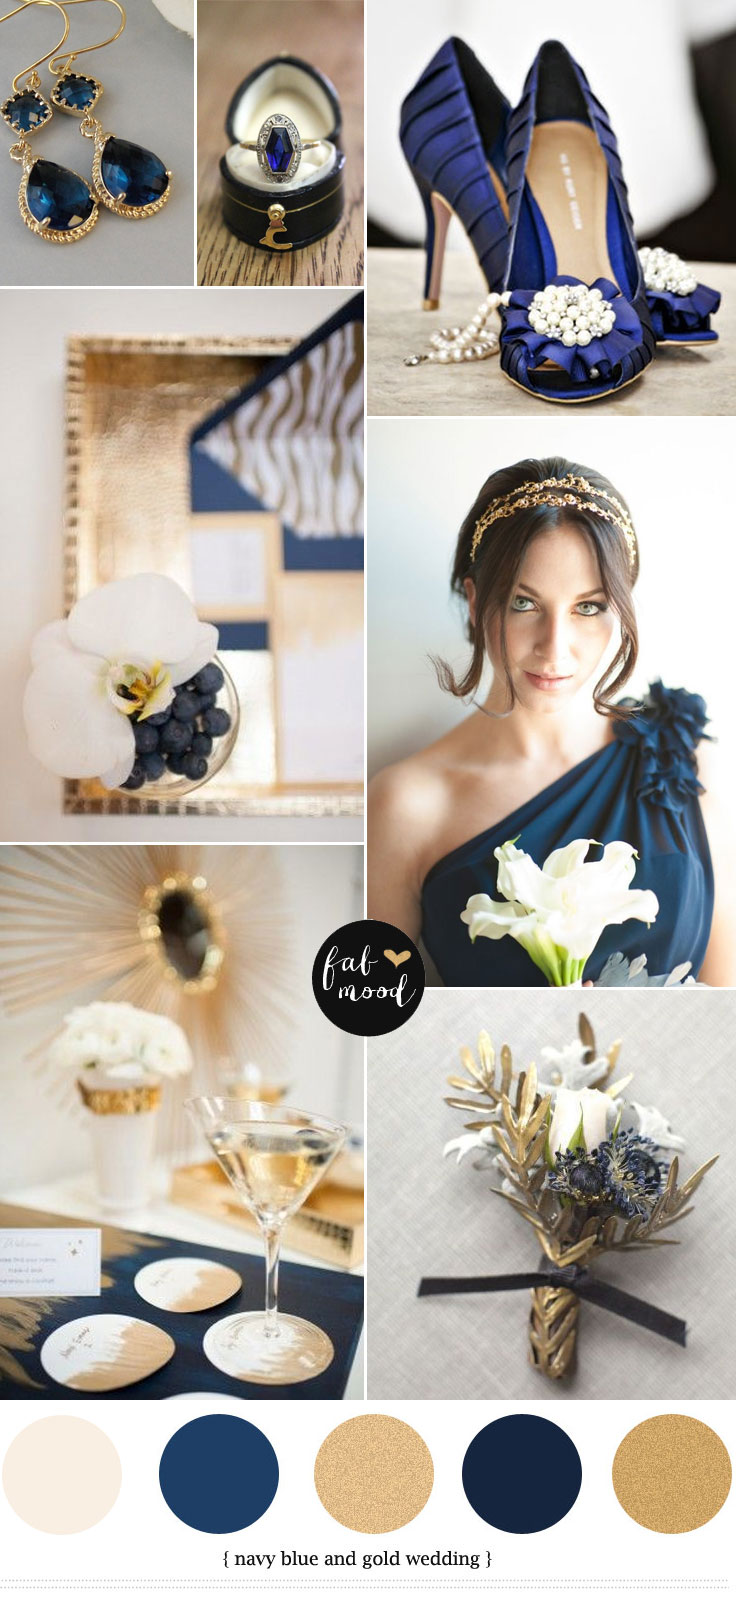 gold and navy blue wedding colours palette,navy blue and gold wedding colors,wedding colours,wedding mood board,wedding inspirations,navy blue bridesmaid